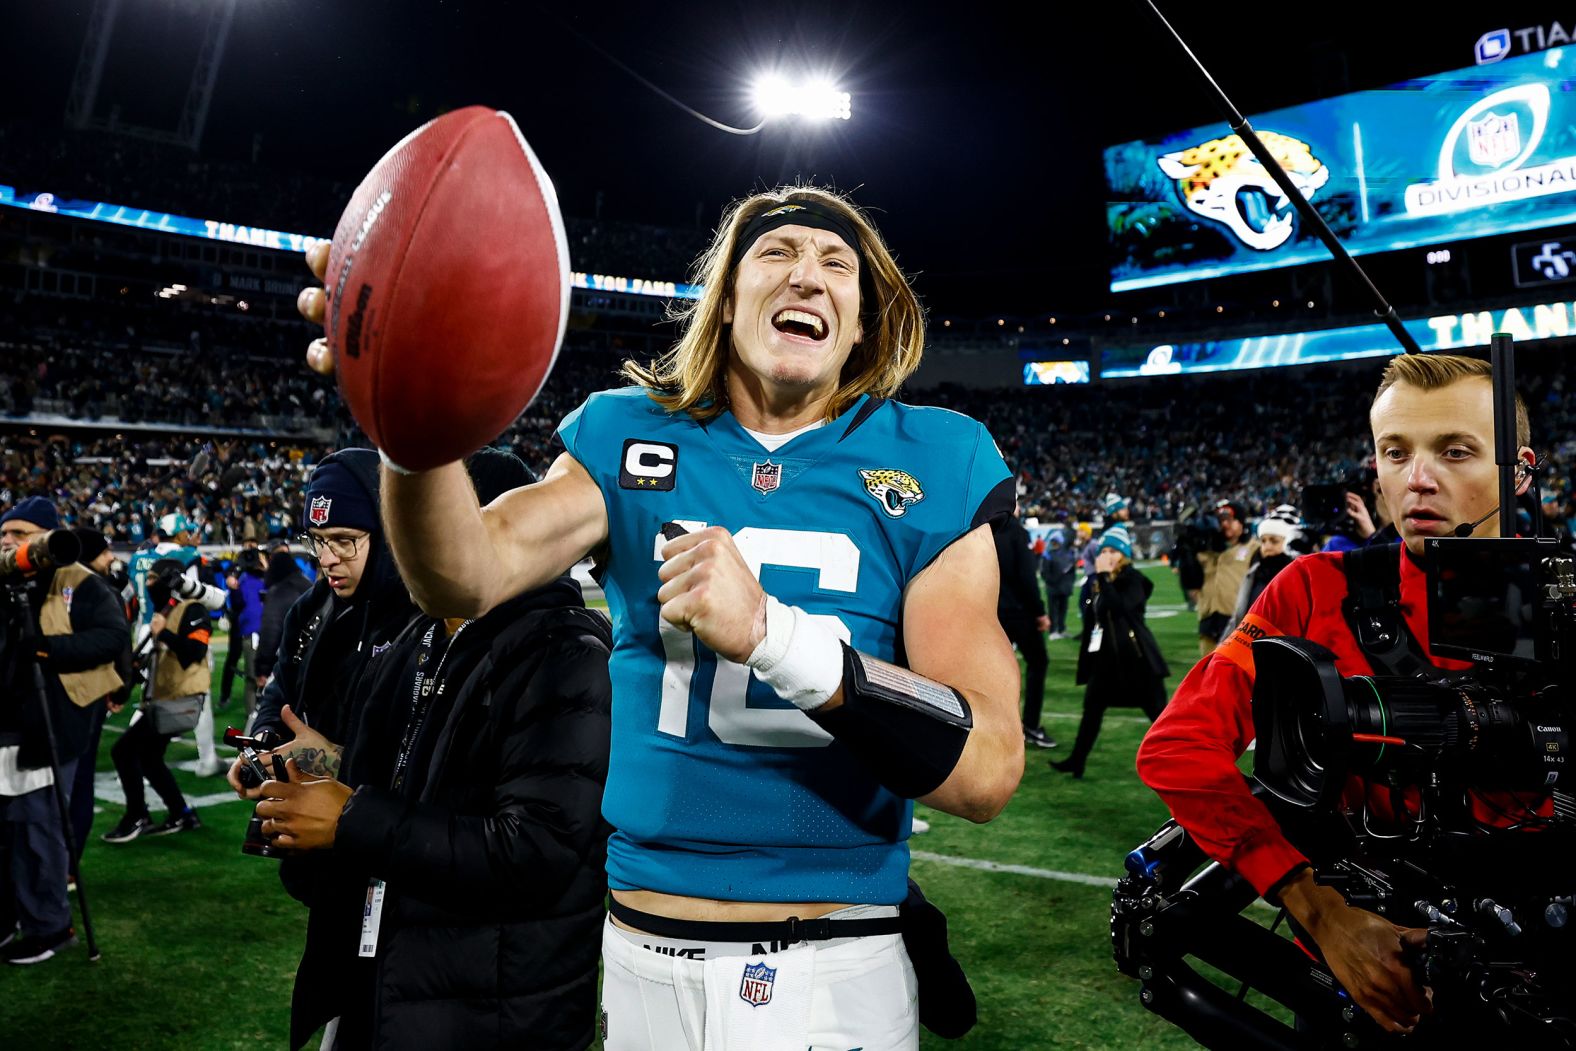 Jacksonville Jaguars quarterback Trevor Lawrence celebrates on the field after <a href="index.php?page=&url=https%3A%2F%2Fwww.cnn.com%2F2023%2F01%2F15%2Fsport%2Fjacksonville-jaguars-los-angeles-chargers-nfl-playoff-comeback%2Findex.html" target="_blank">a massive comeback</a> against the Los Angeles Chargers in a wild card playoff football game on Saturday, January 14. Lawrence threw four touchdowns — after throwing four interceptions — as he led the Jaguars back from 27-0 down in the first half to beat the Chargers 31-30. <a href="index.php?page=&url=https%3A%2F%2Fwww.cnn.com%2F2022%2F09%2F12%2Fsport%2Fgallery%2Fnfl-2022-season%2Findex.html" target="_blank">See the best photos from the 2022 NFL season.</a>